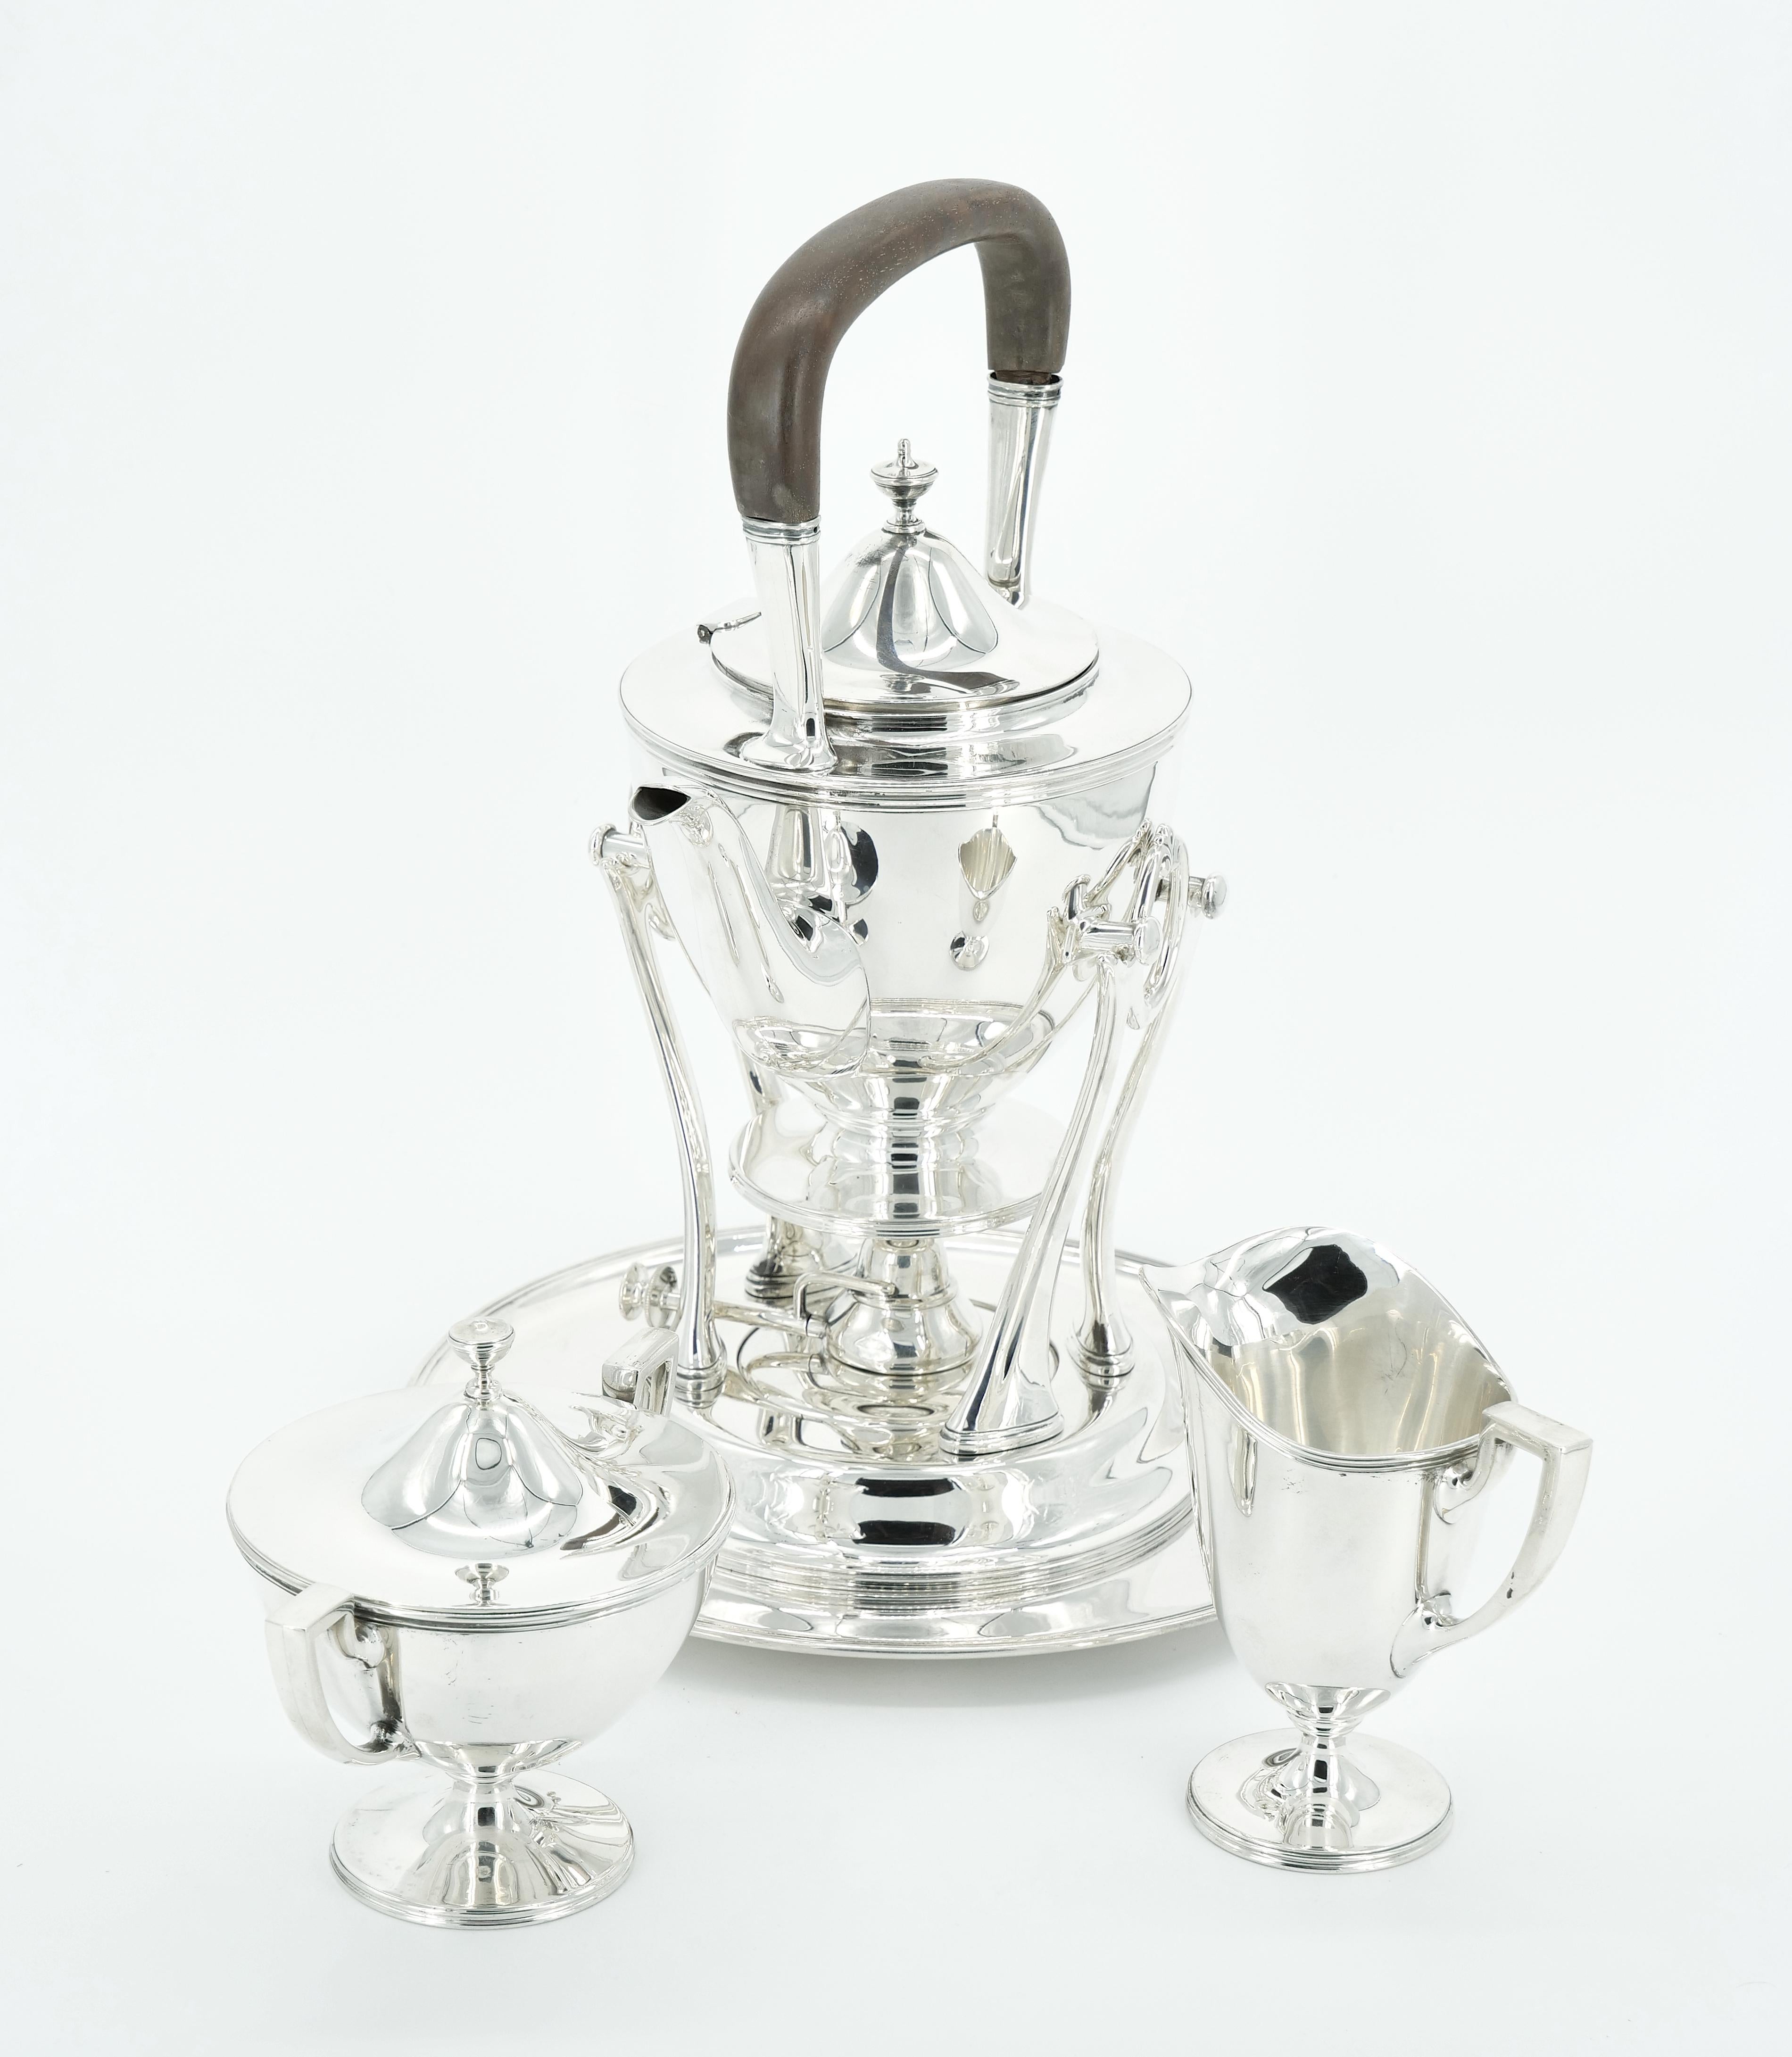 American Classical Tiffany Sterling Silver Classical Style Four Piece Tea / Coffee Service For Sale